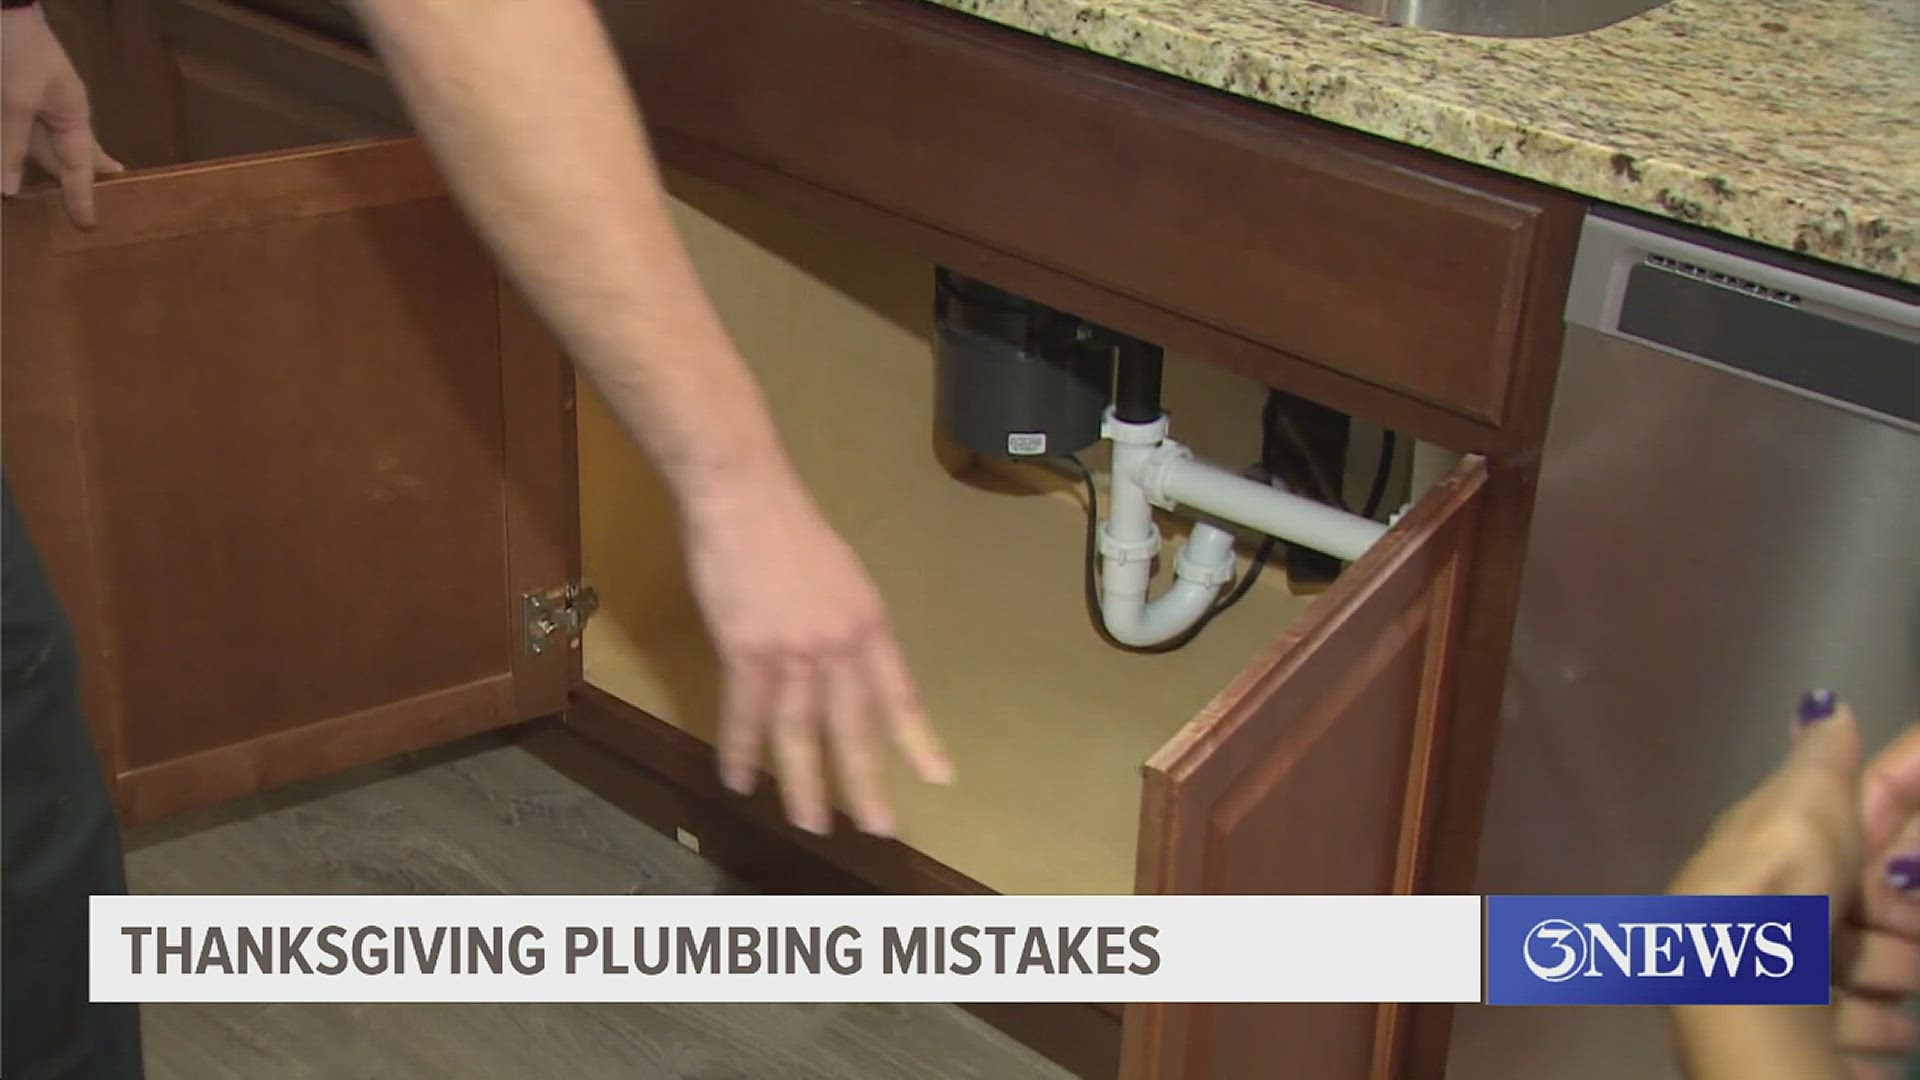 The Friday after Thanksgiving is notoriously one of the busiest days of the year for plumbers.